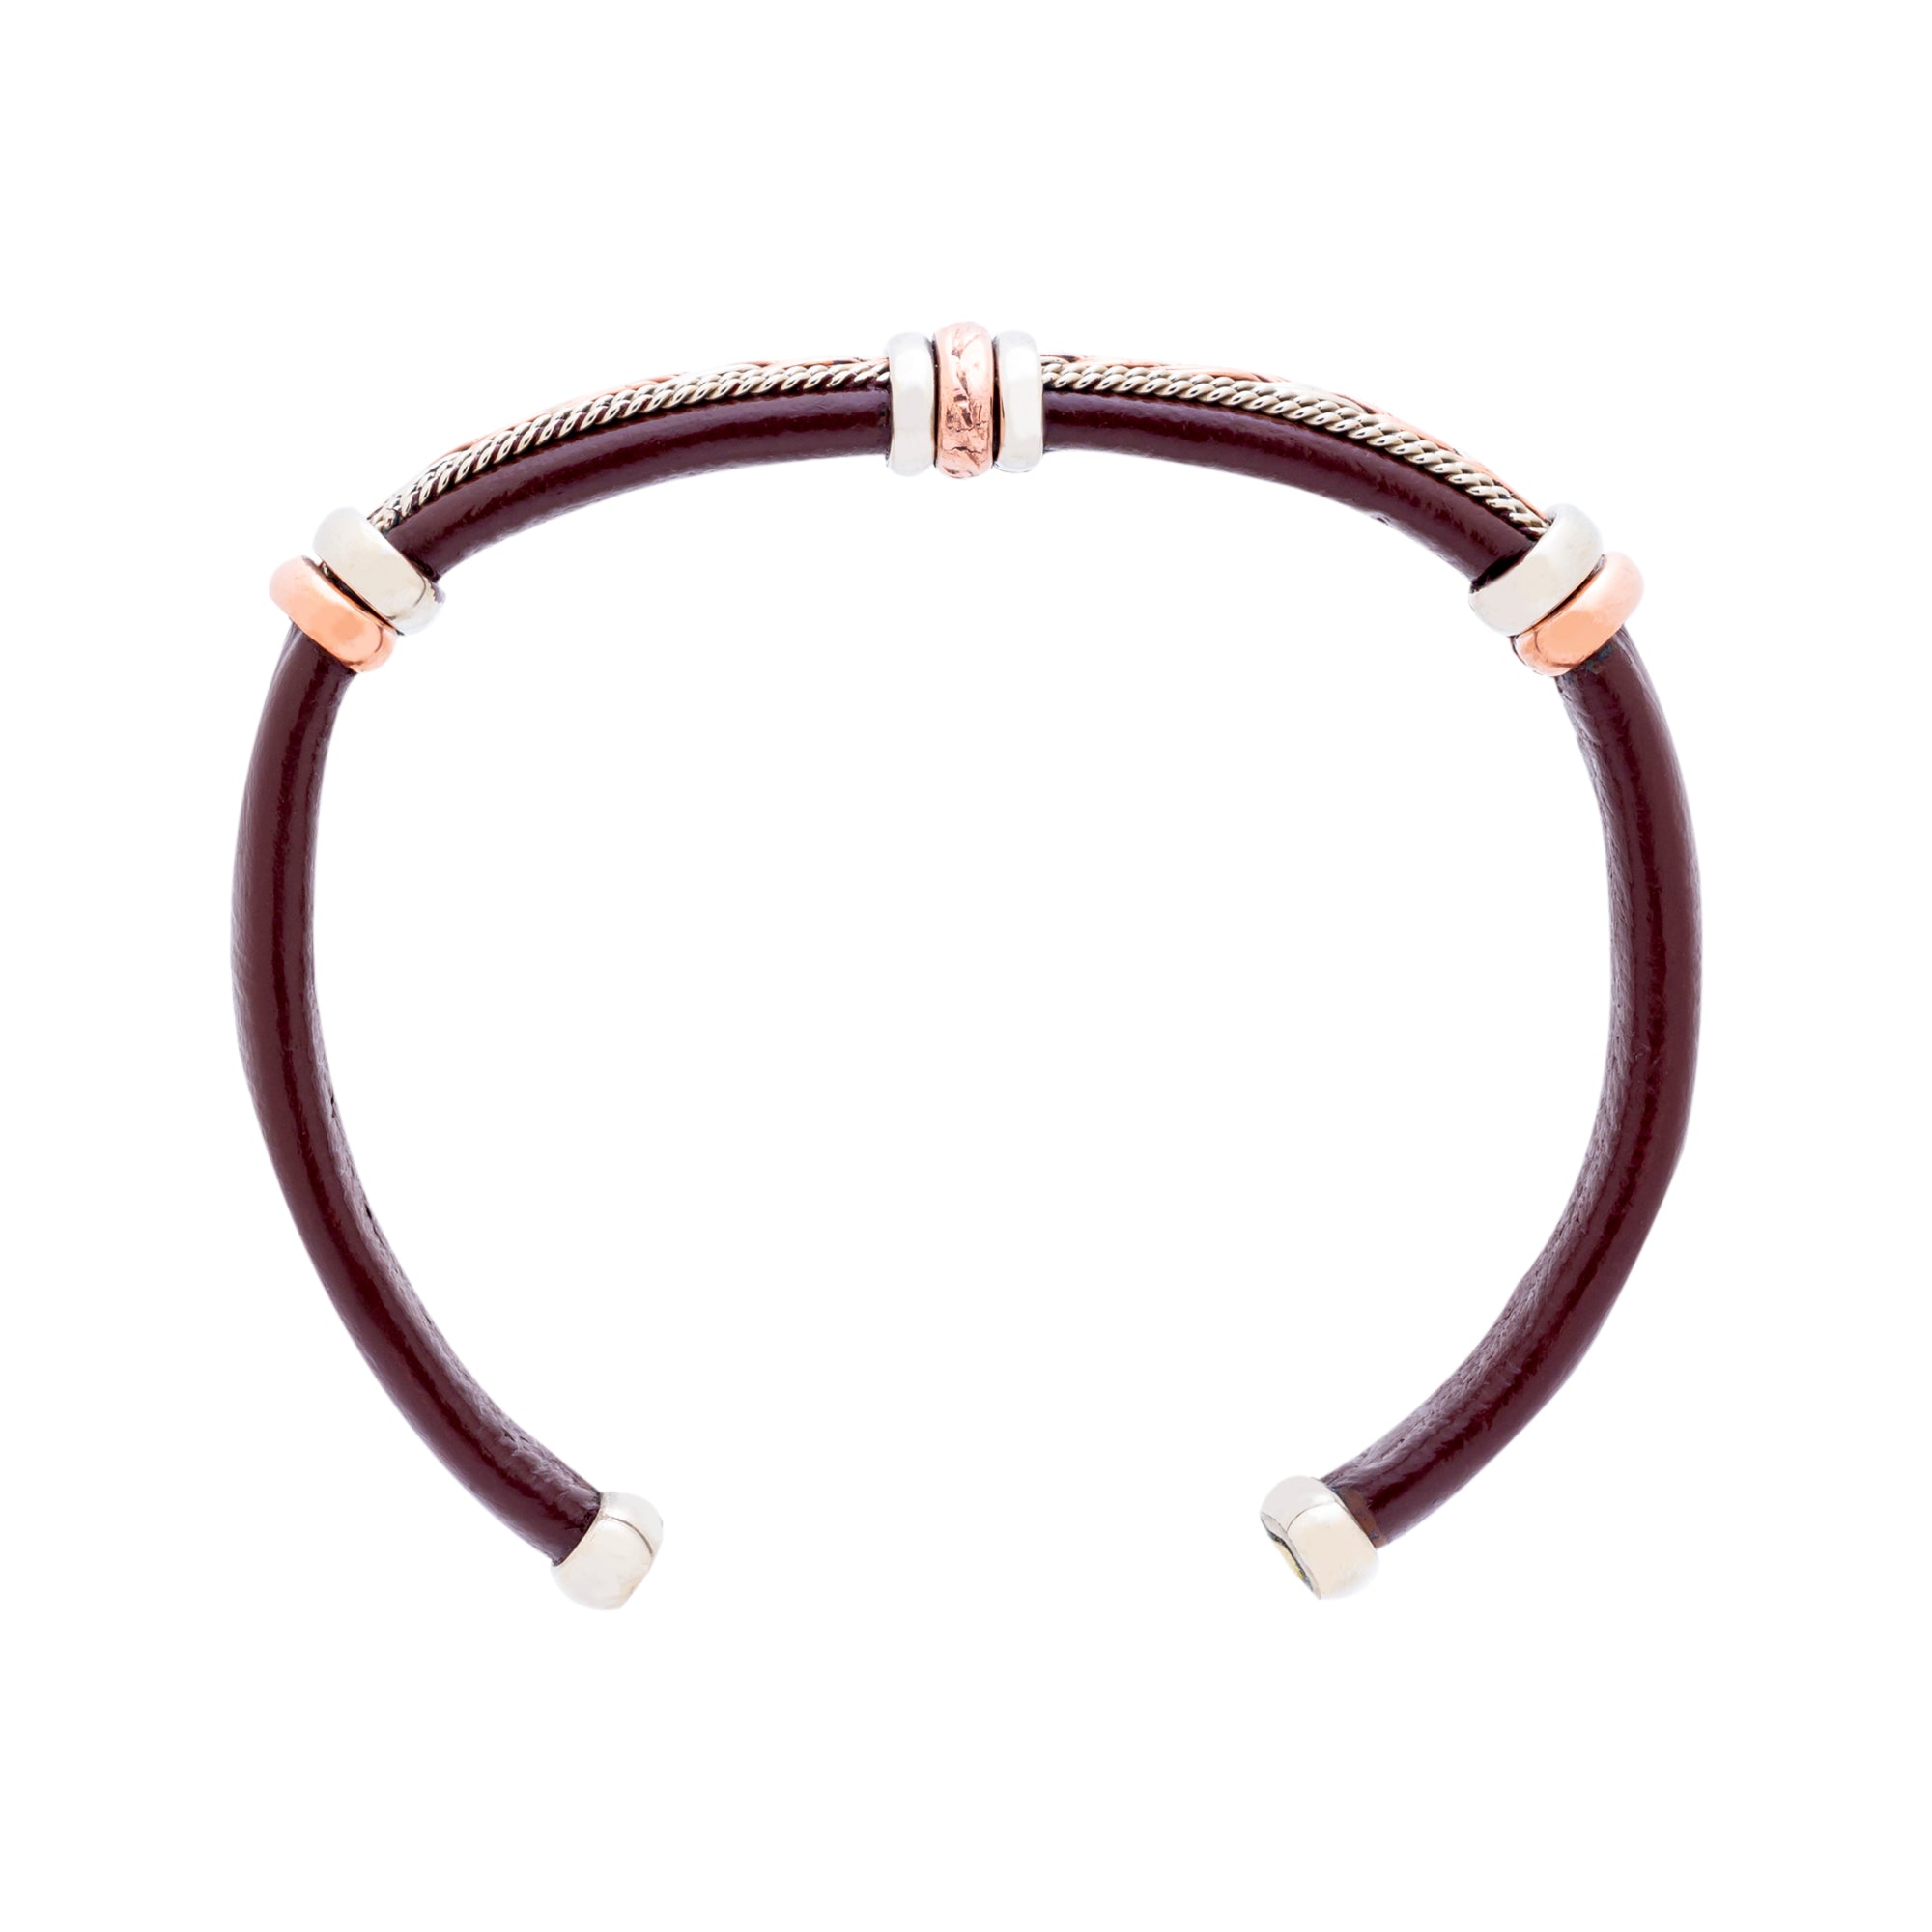 Leather Bracelet BR.ULB.0305 - Brown Leather Cuff Bracelet -Handcrafted by HPSilver, LLC.